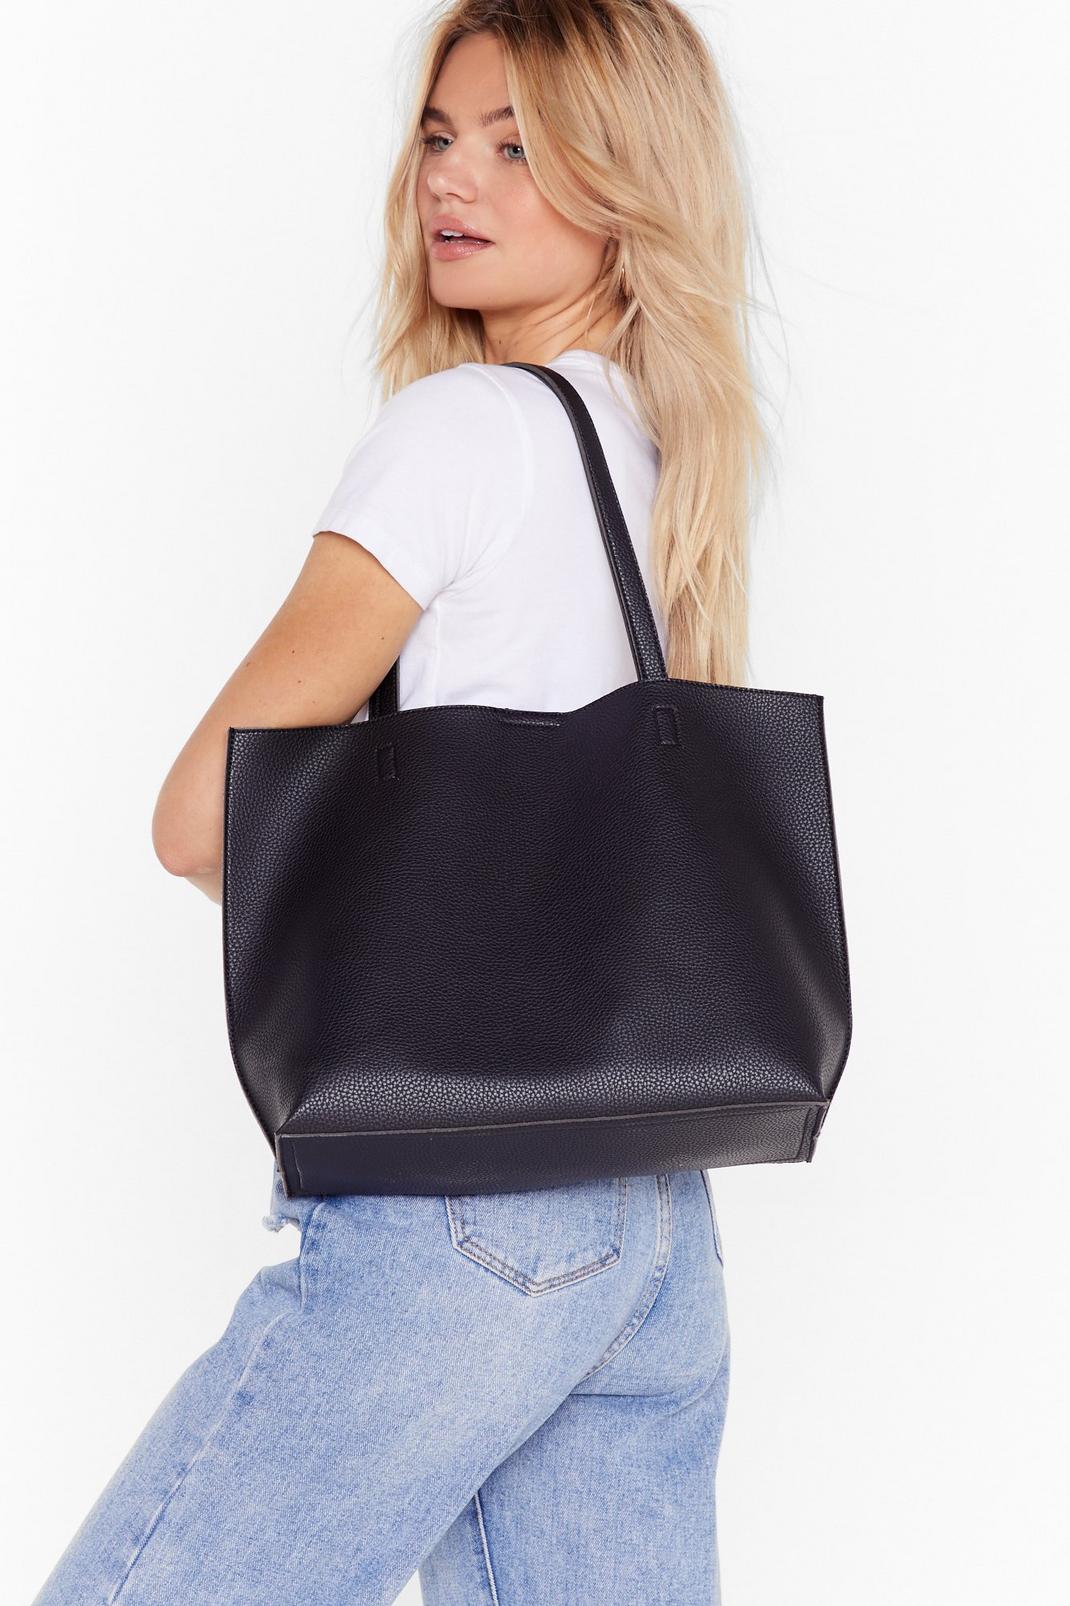 WANT Hold Your Own Faux Leather Tote Bag | Nasty Gal